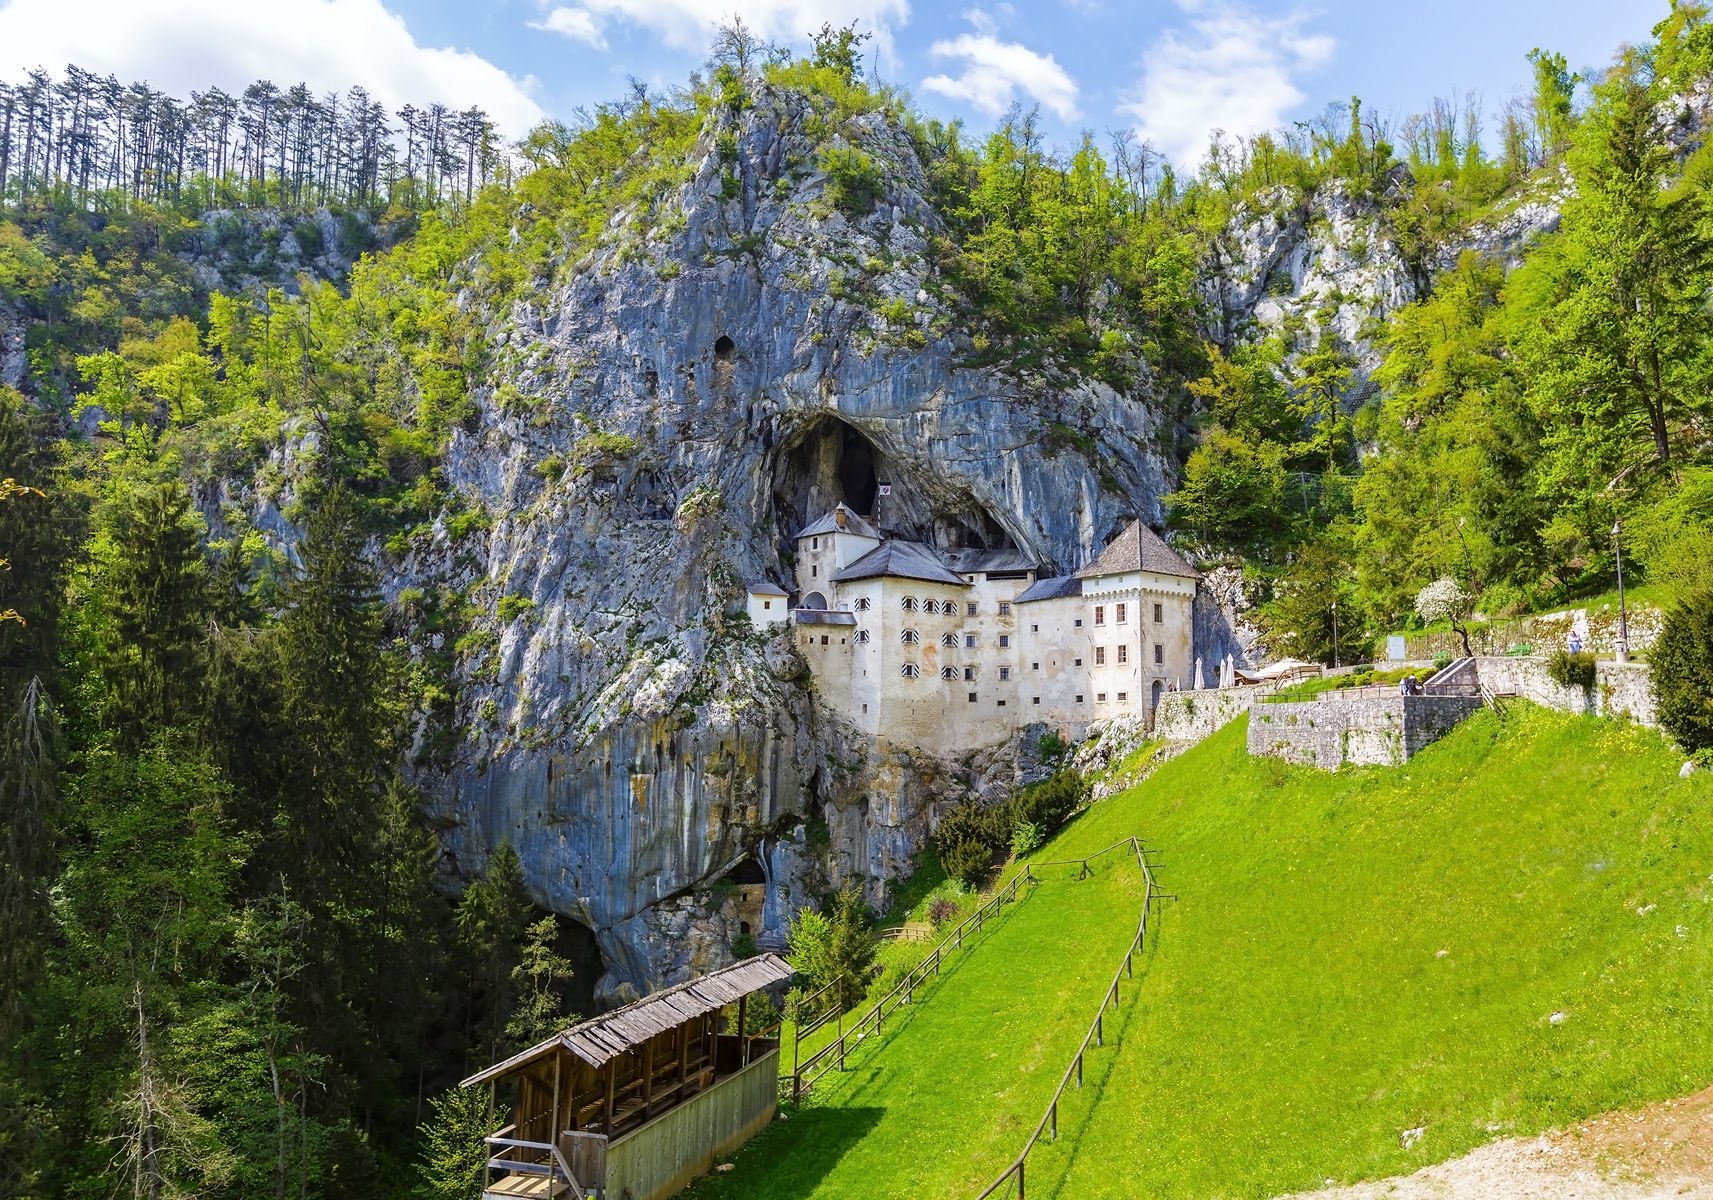 <p>Located near Postojna Cave, this 13th-century <a href="https://www.postojnska-jama.eu/en/predjama-castle/">medieval castle</a> was built right into the side of a limestone cliff. You may have already seen Predjama Castle in the TV series <em>The Witcher</em>, but this is your chance to plunge into another era and wander through the impregnable fortress’s dungeons, rooms and secret passages. The castle is said to have belonged to Erasmus Lueger, a knight-turned-brigand who stole from nobility and gave back to the poor, much like the fabled Robin Hood.</p>